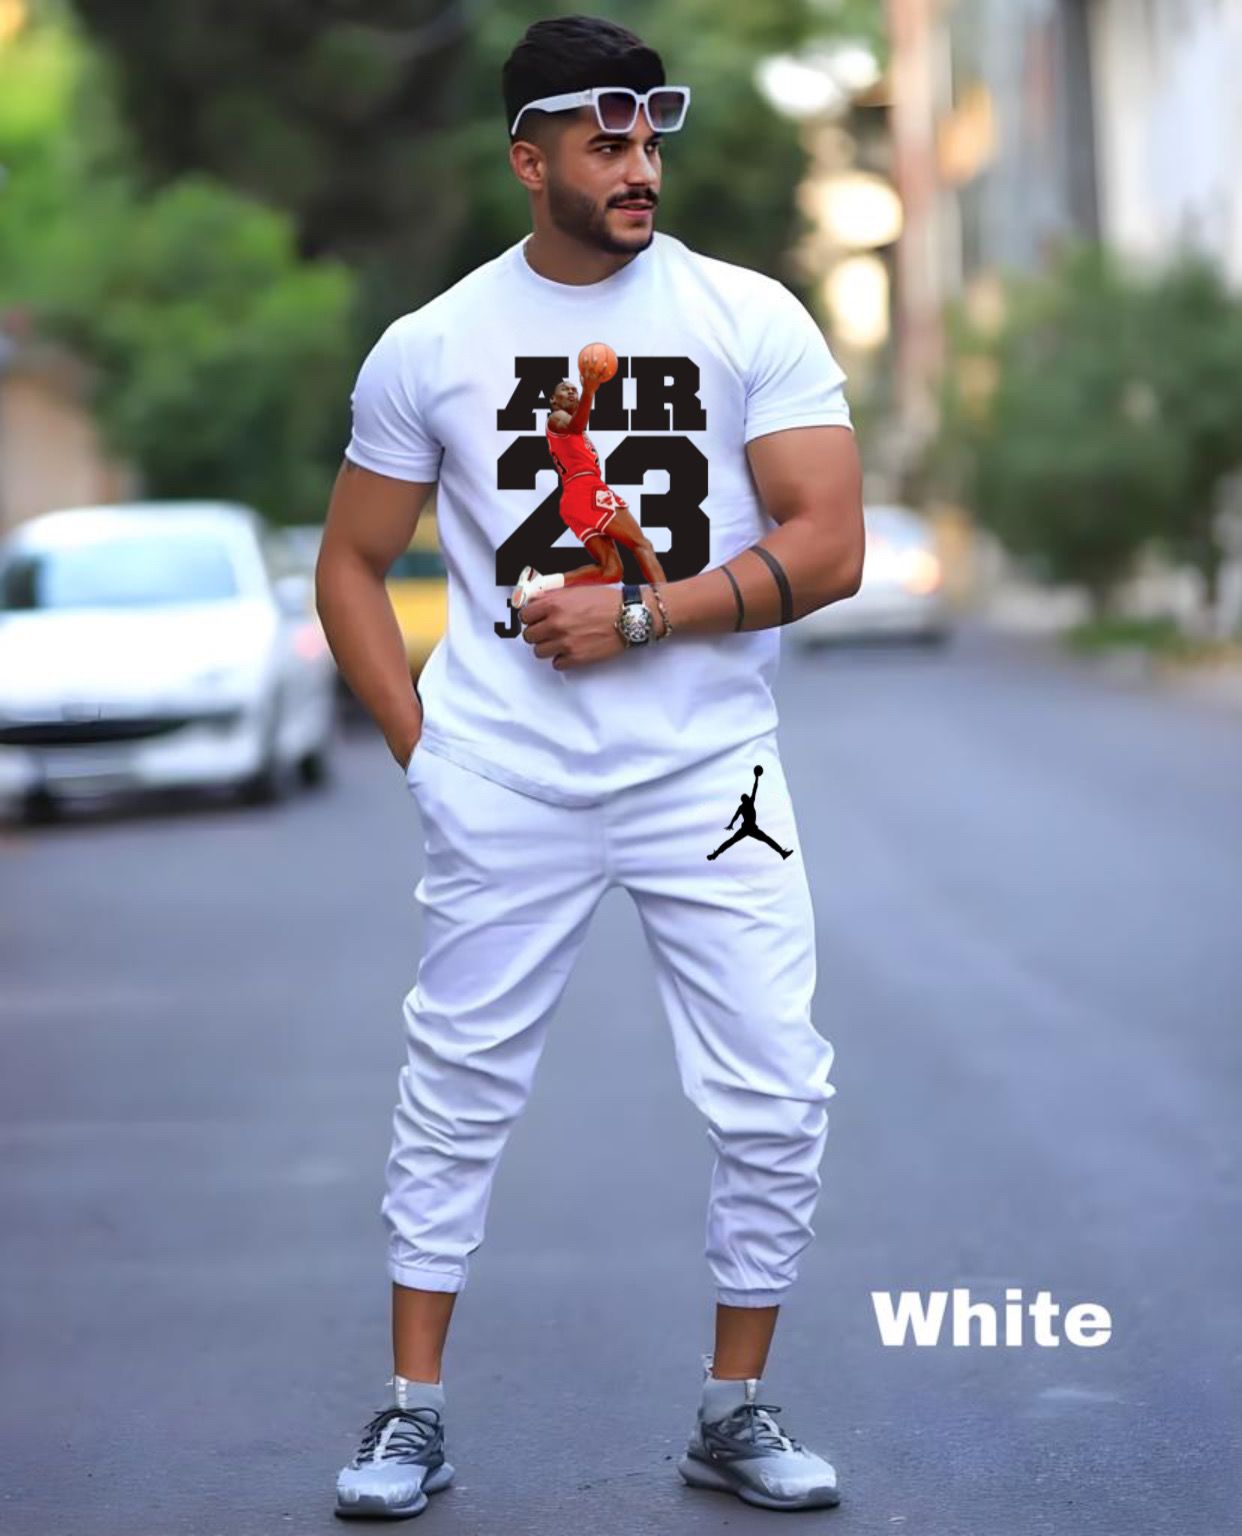 Details View - Jordan Tracksuit photos - reseller,reseller marketplace,advetising your products,reseller bazzar,resellerbazzar.in,india's classified site,Jordan Tracksuit | Jordan Tracksuit in surat | Jordan Tracksuit for man | Tracksuit for man